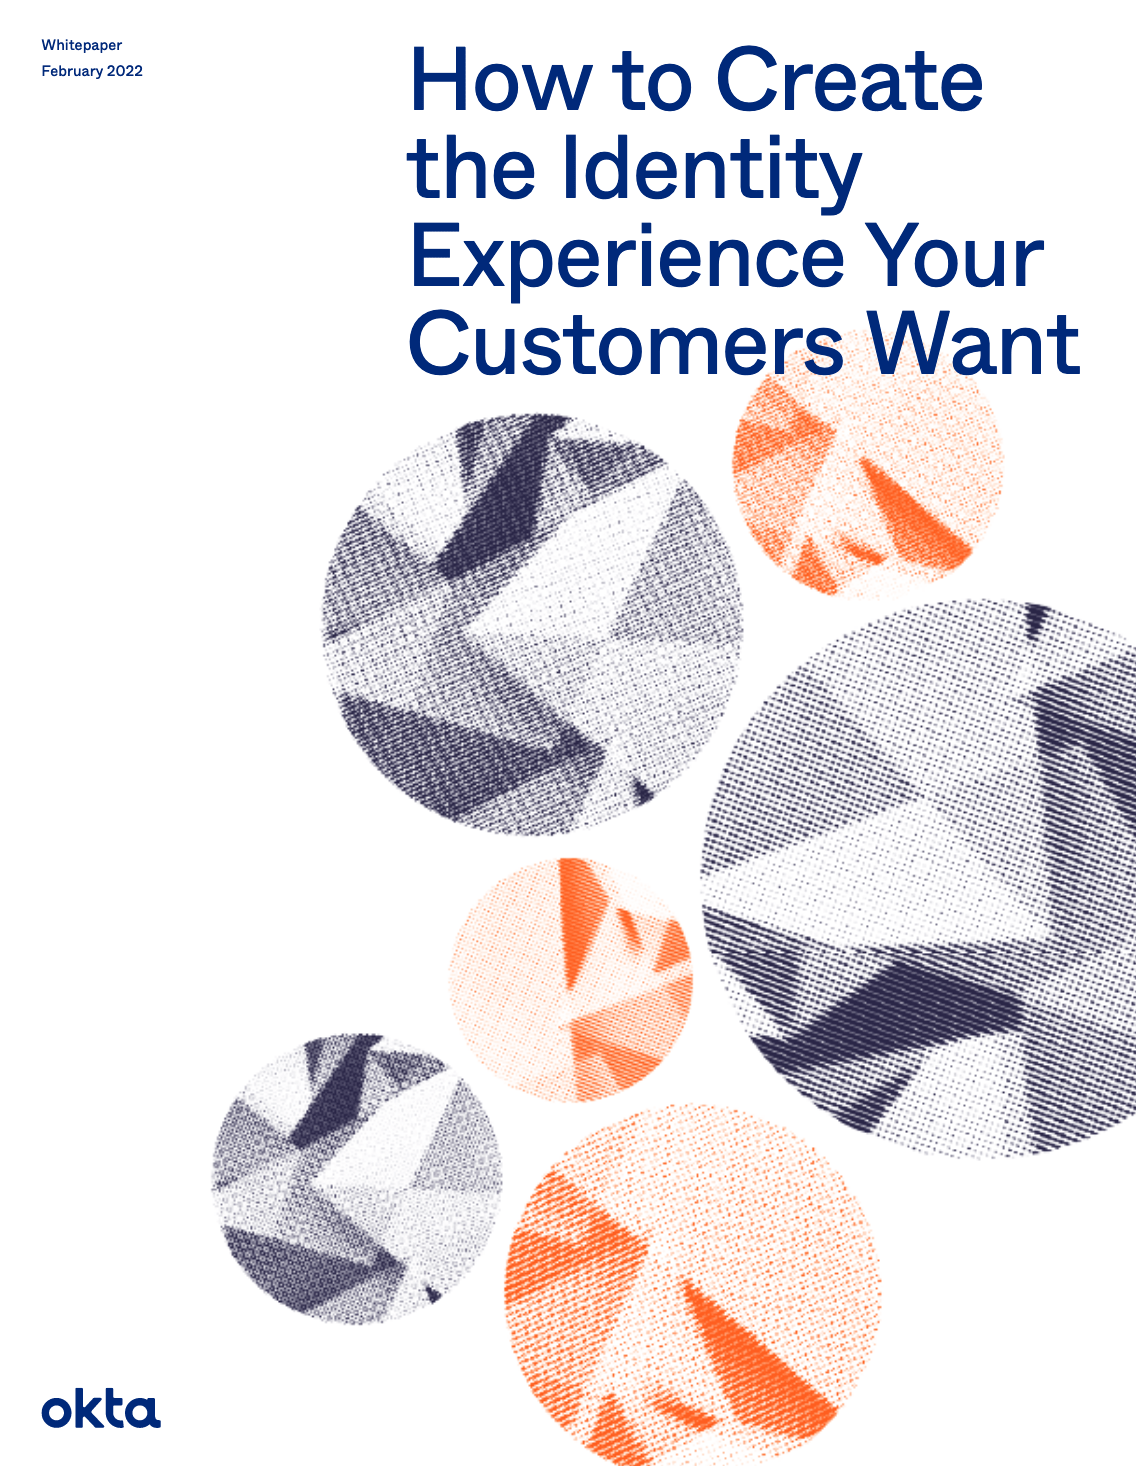 How to Create the Identity Experience Your Customers Want - How to Create the Identity Experience Your Customers Want